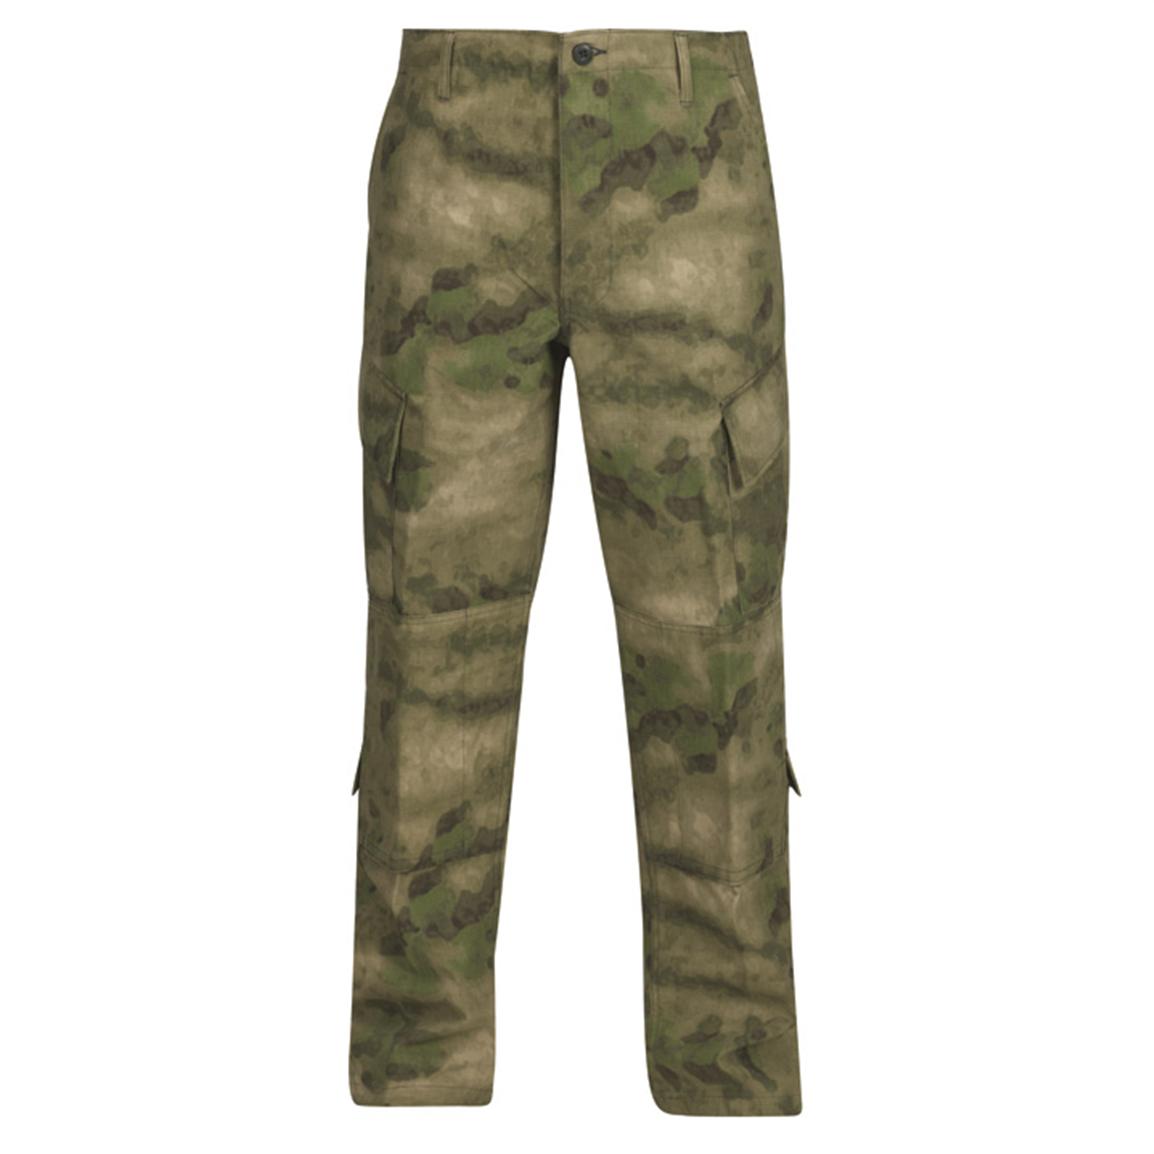 Men's Propper ACU Pants - 592912, Tactical Clothing at Sportsman's Guide